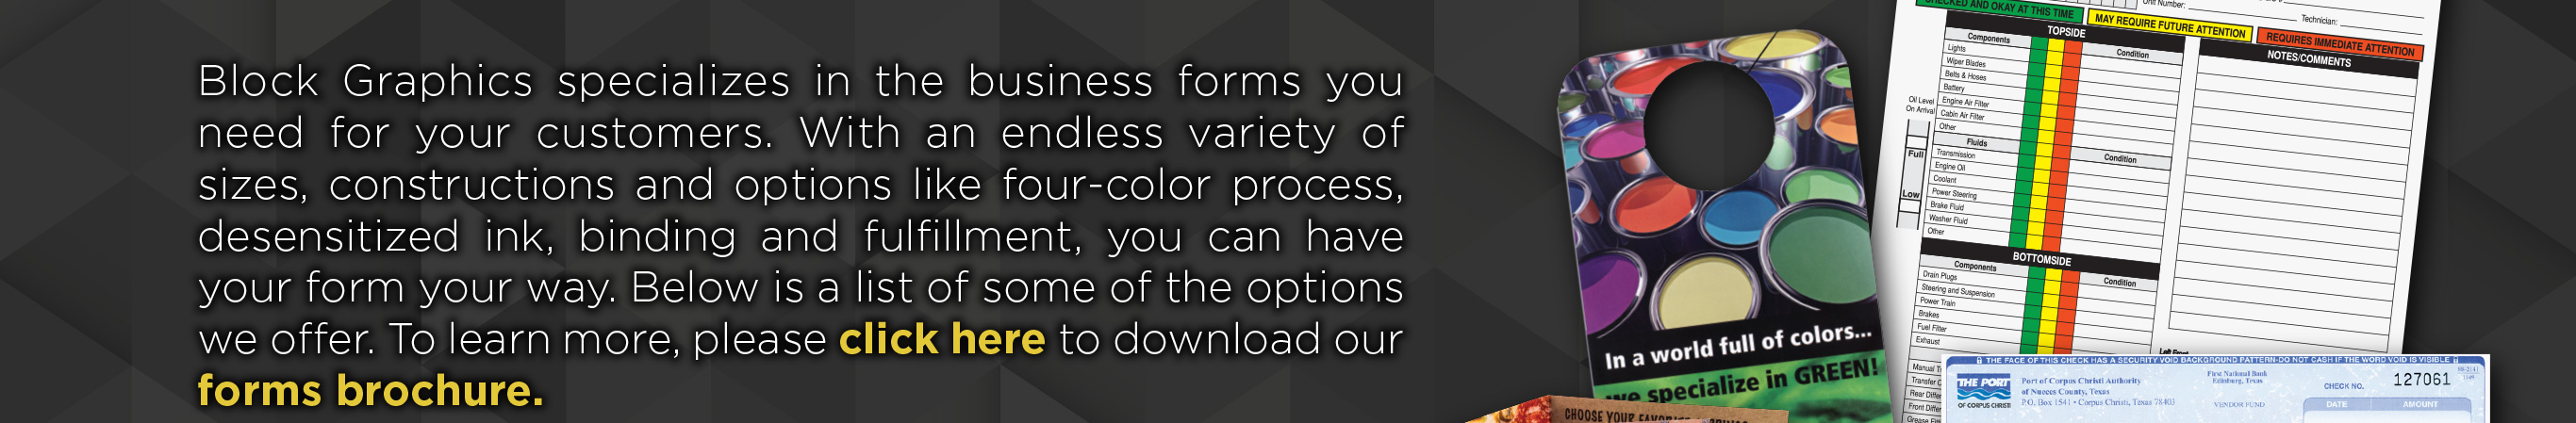 Block Graphics specializes in the business forms youneed for your business. With an endless variety ofsizes, constructions and options like four-color process, desentized ink, binding and fulfillment, you can have your form your way. Below is a list of some of our the options we offer. To learn more, please click here to download our forms brochure.